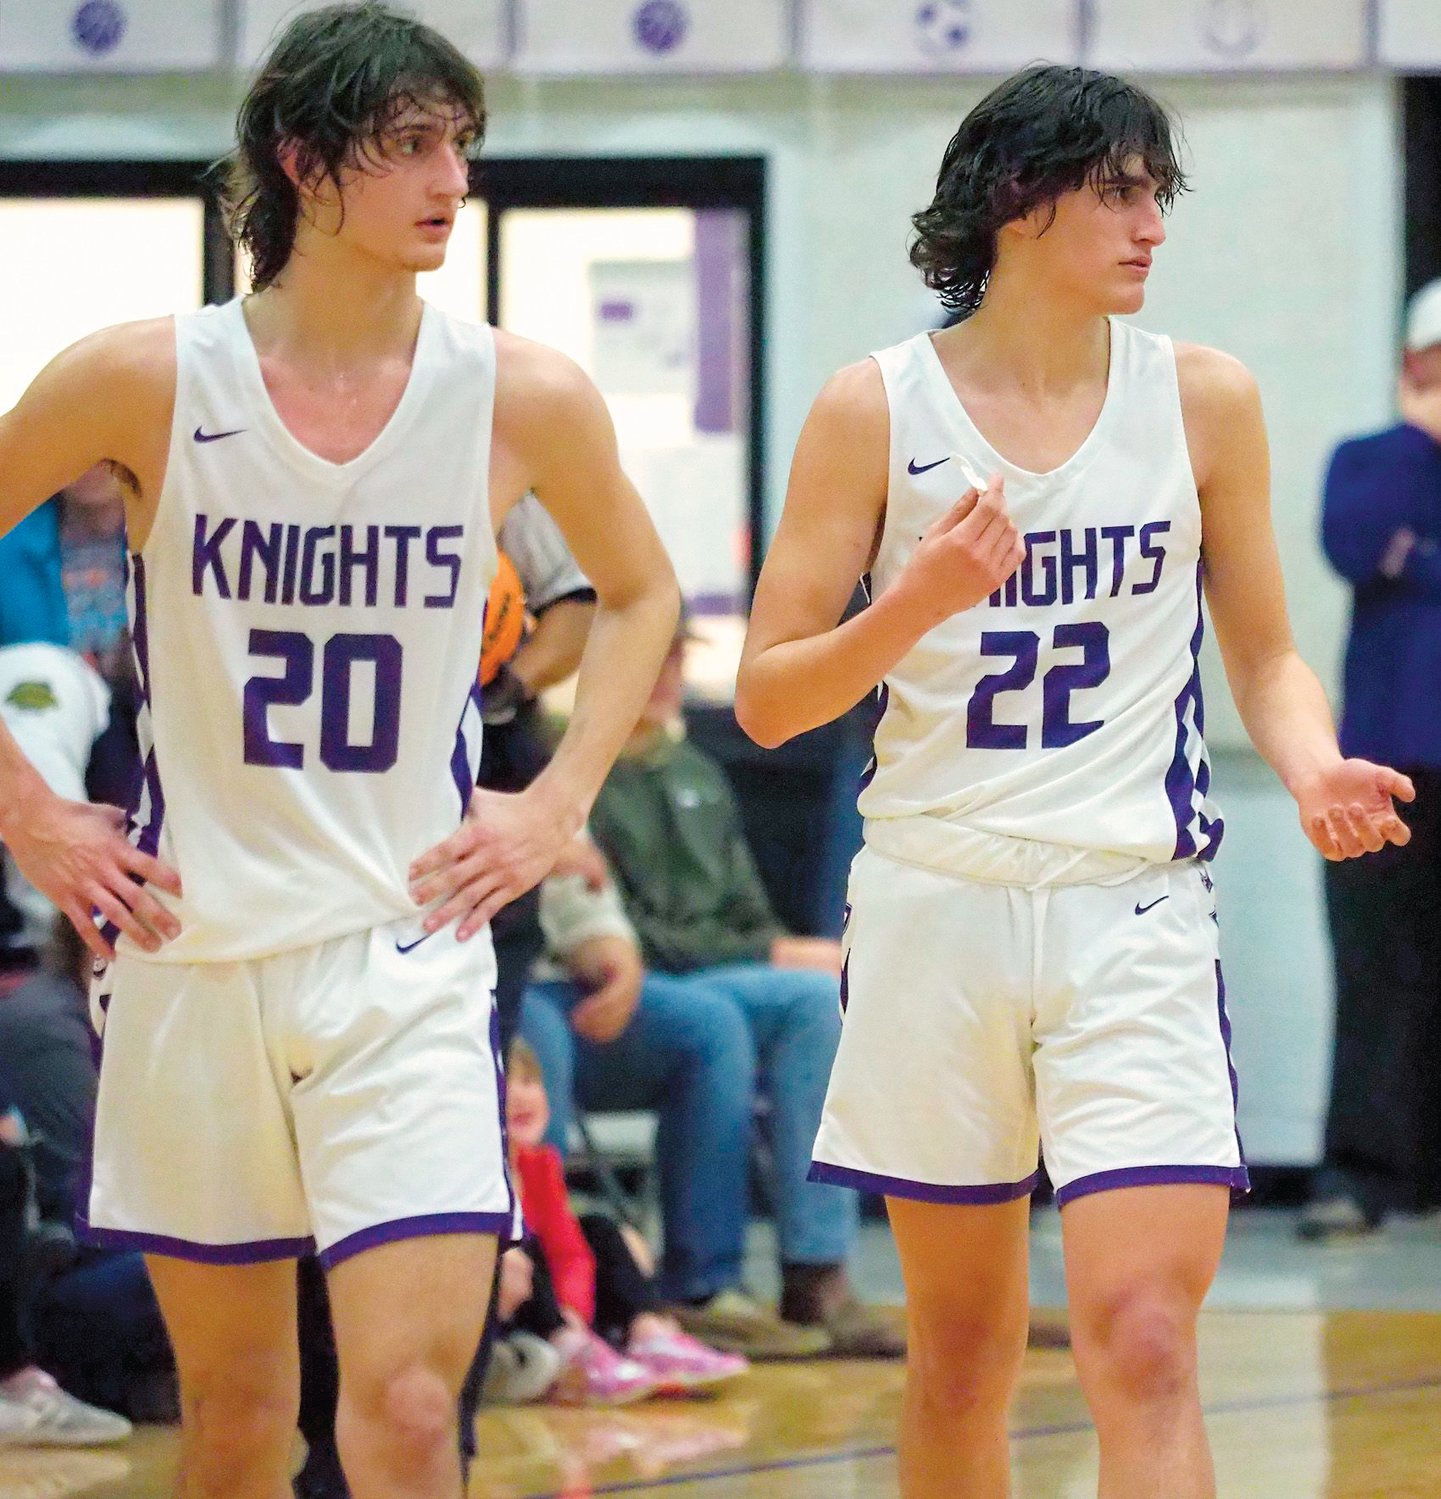 Chatham Charter junior Adam Harvey (20) and freshman Beau Harvey (22) walk down the floor after a whistle in the Knights' 61-35 win over the Bears in Siler City last Friday.